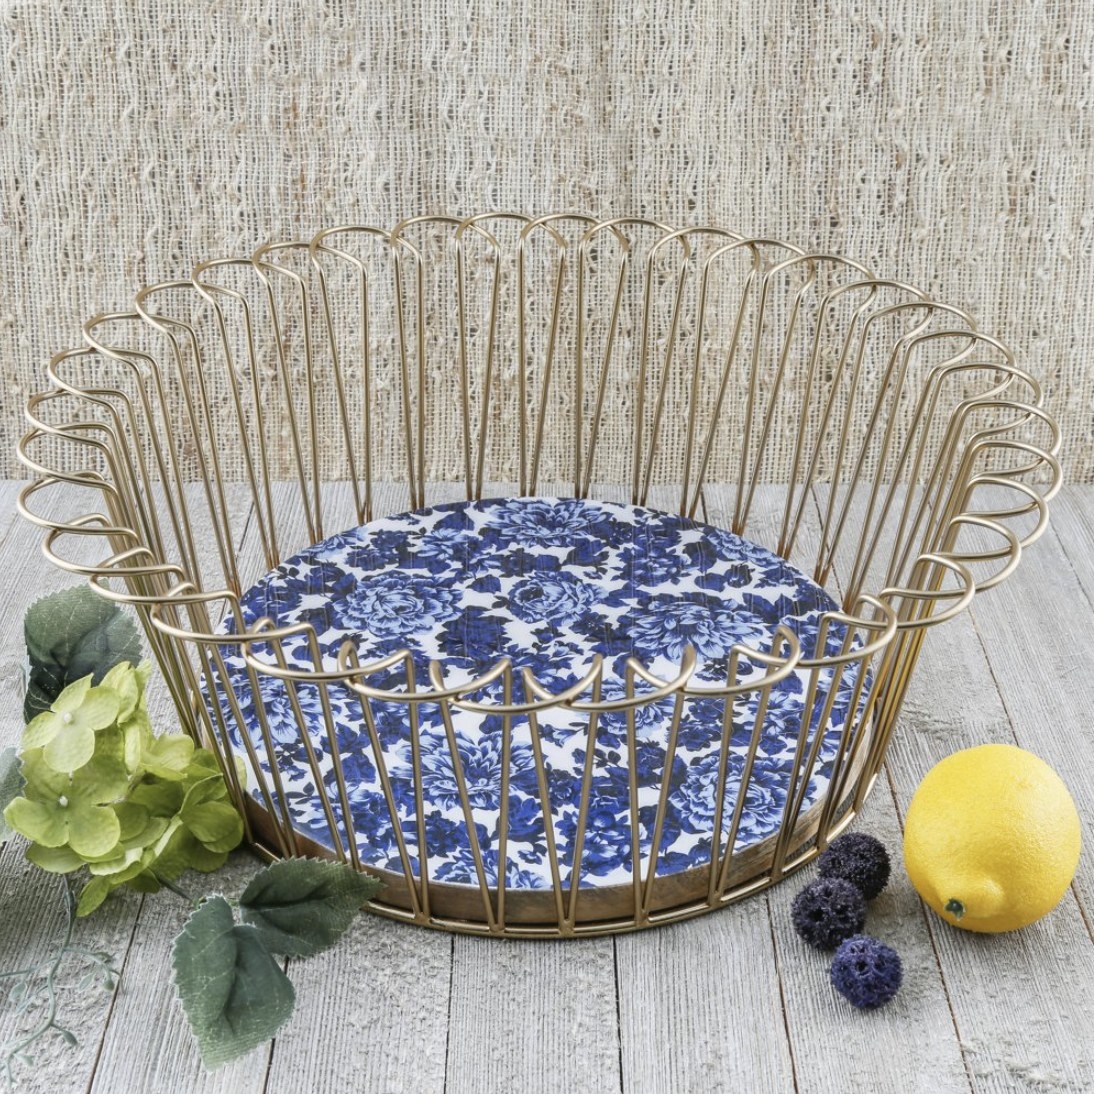 the gold wire basket